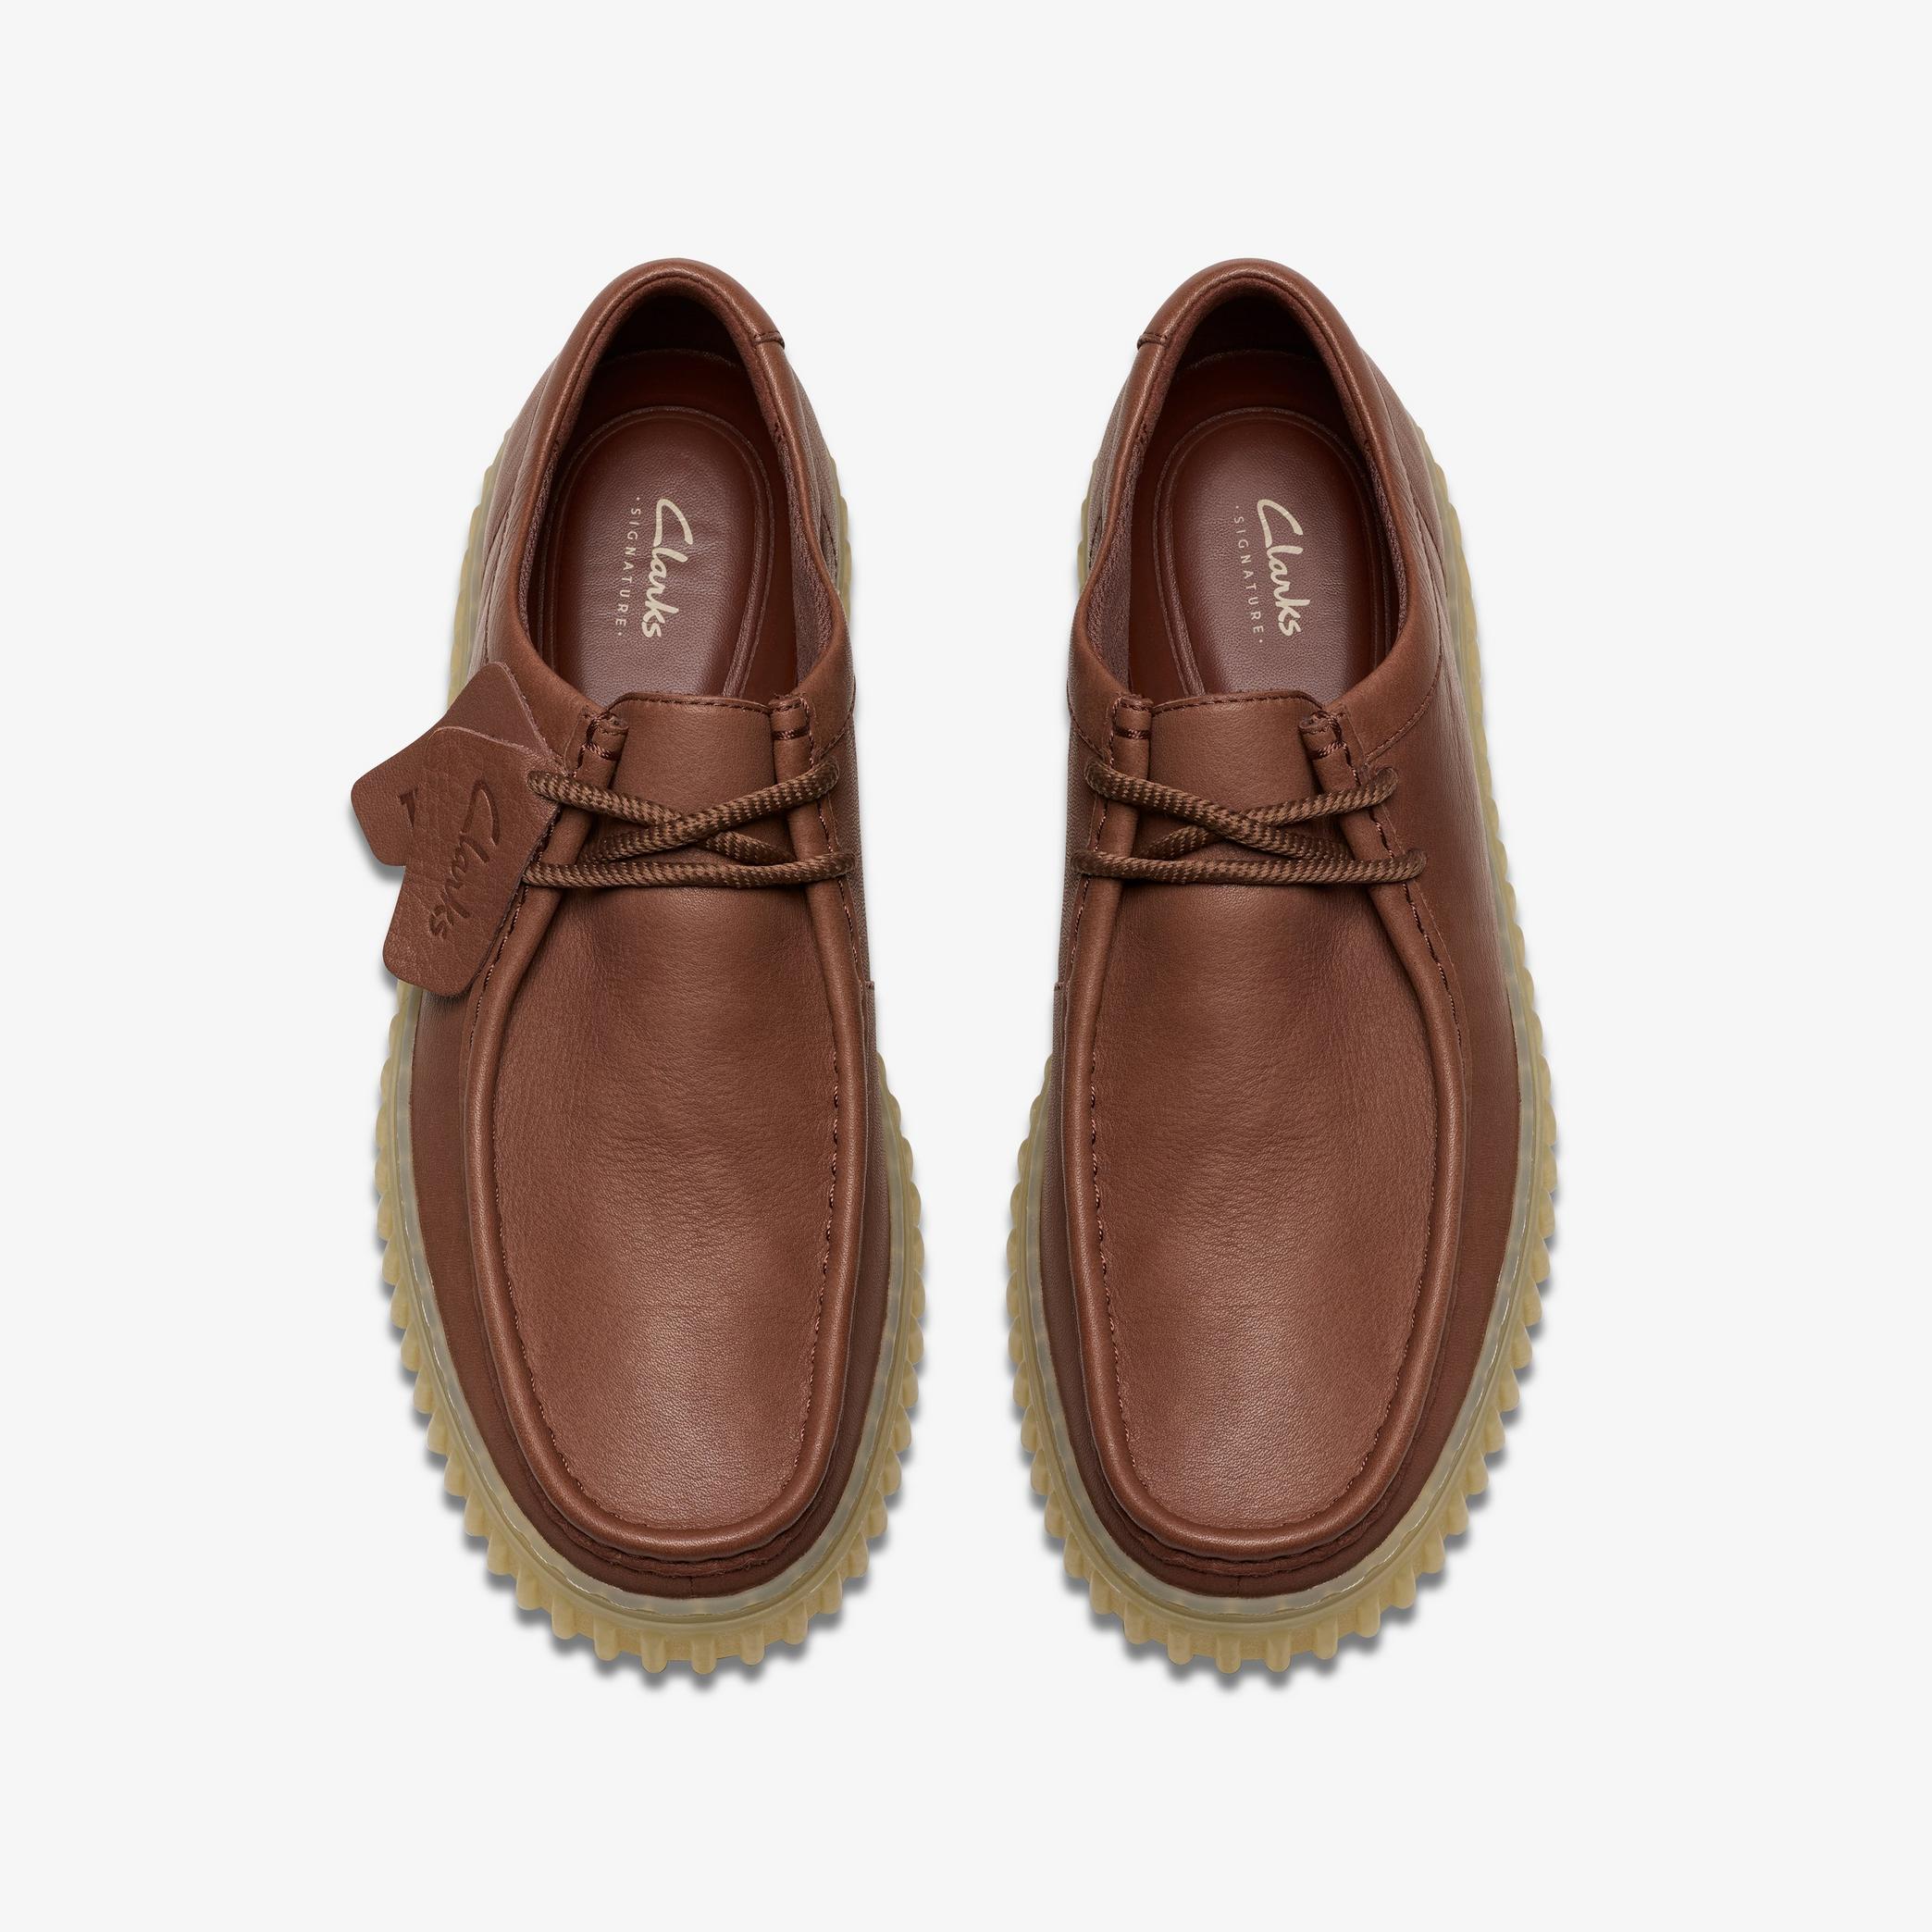 Torhill Lo British Tan Leather Moccasins, view 6 of 6